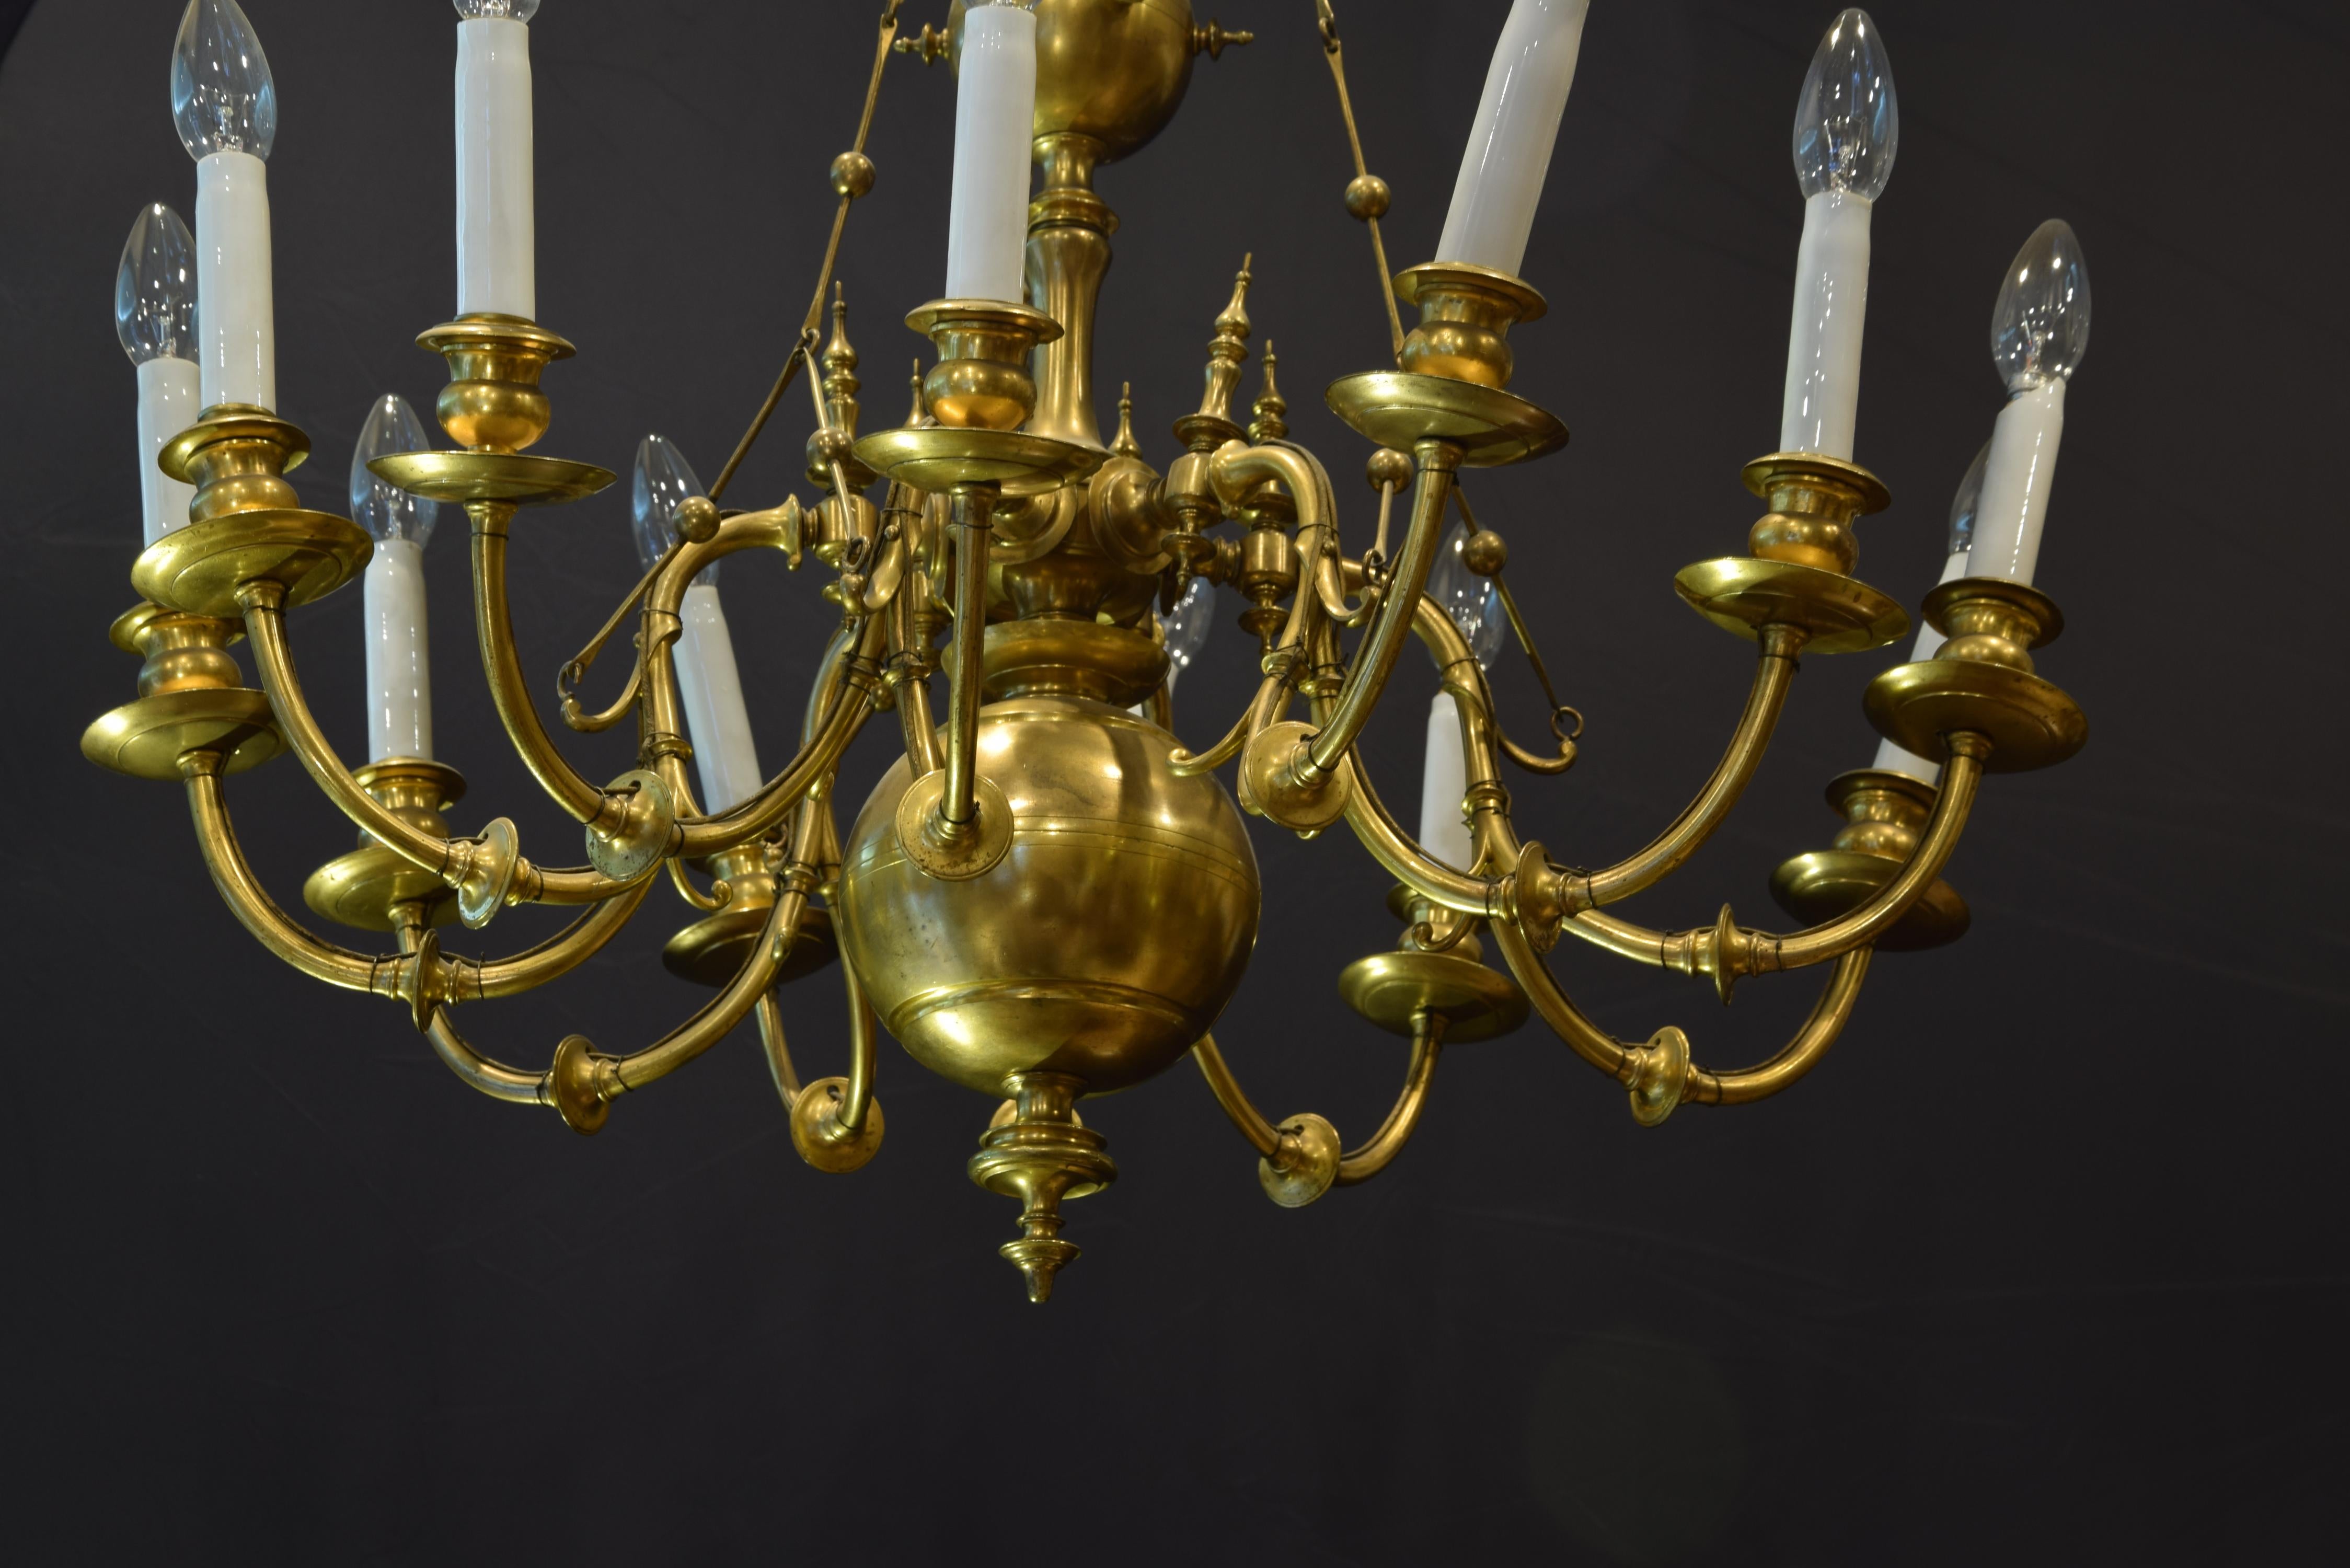 12-arm bronze chandelier, 19th century
Adapted for electrical use, the twelve arms are joined above a sphere, which is fixed to the ceiling by means of a turned fixed arm and with another sphere in the middle of it. The earliest examples of this